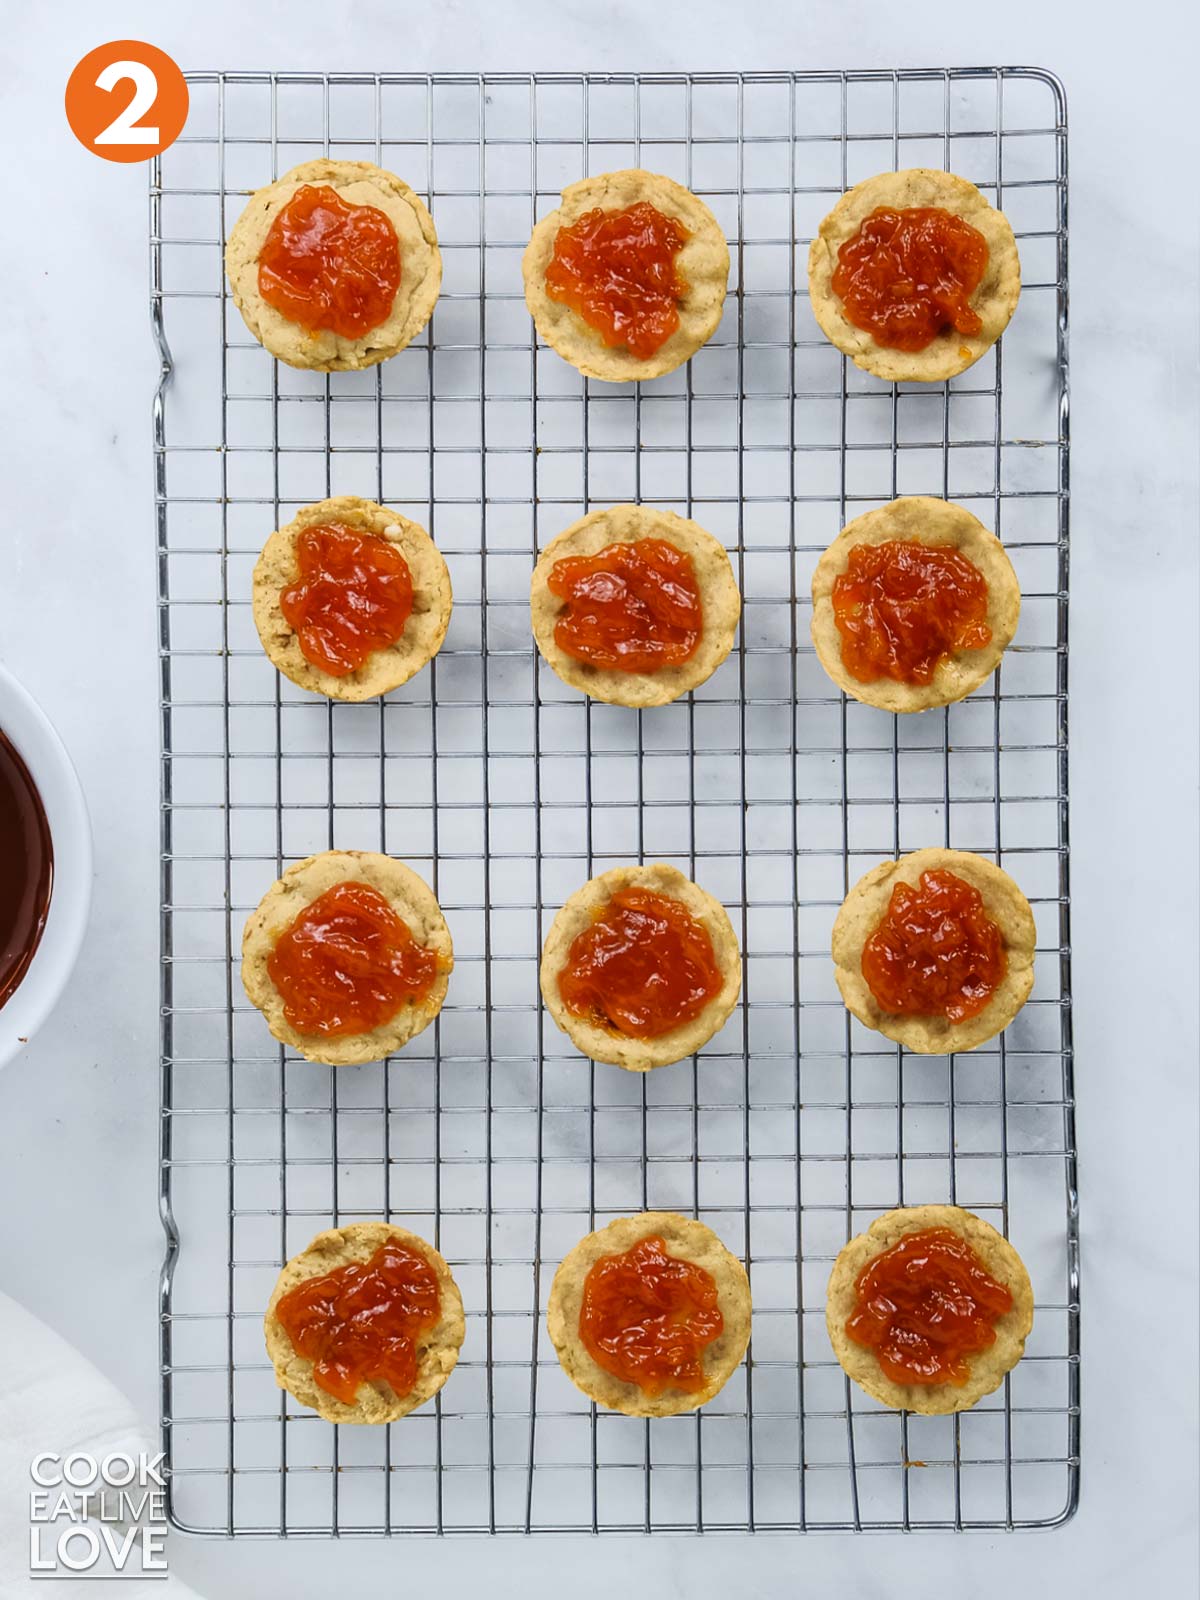 Jaffa cakes cooling on wire rack with orange marmalade on top.